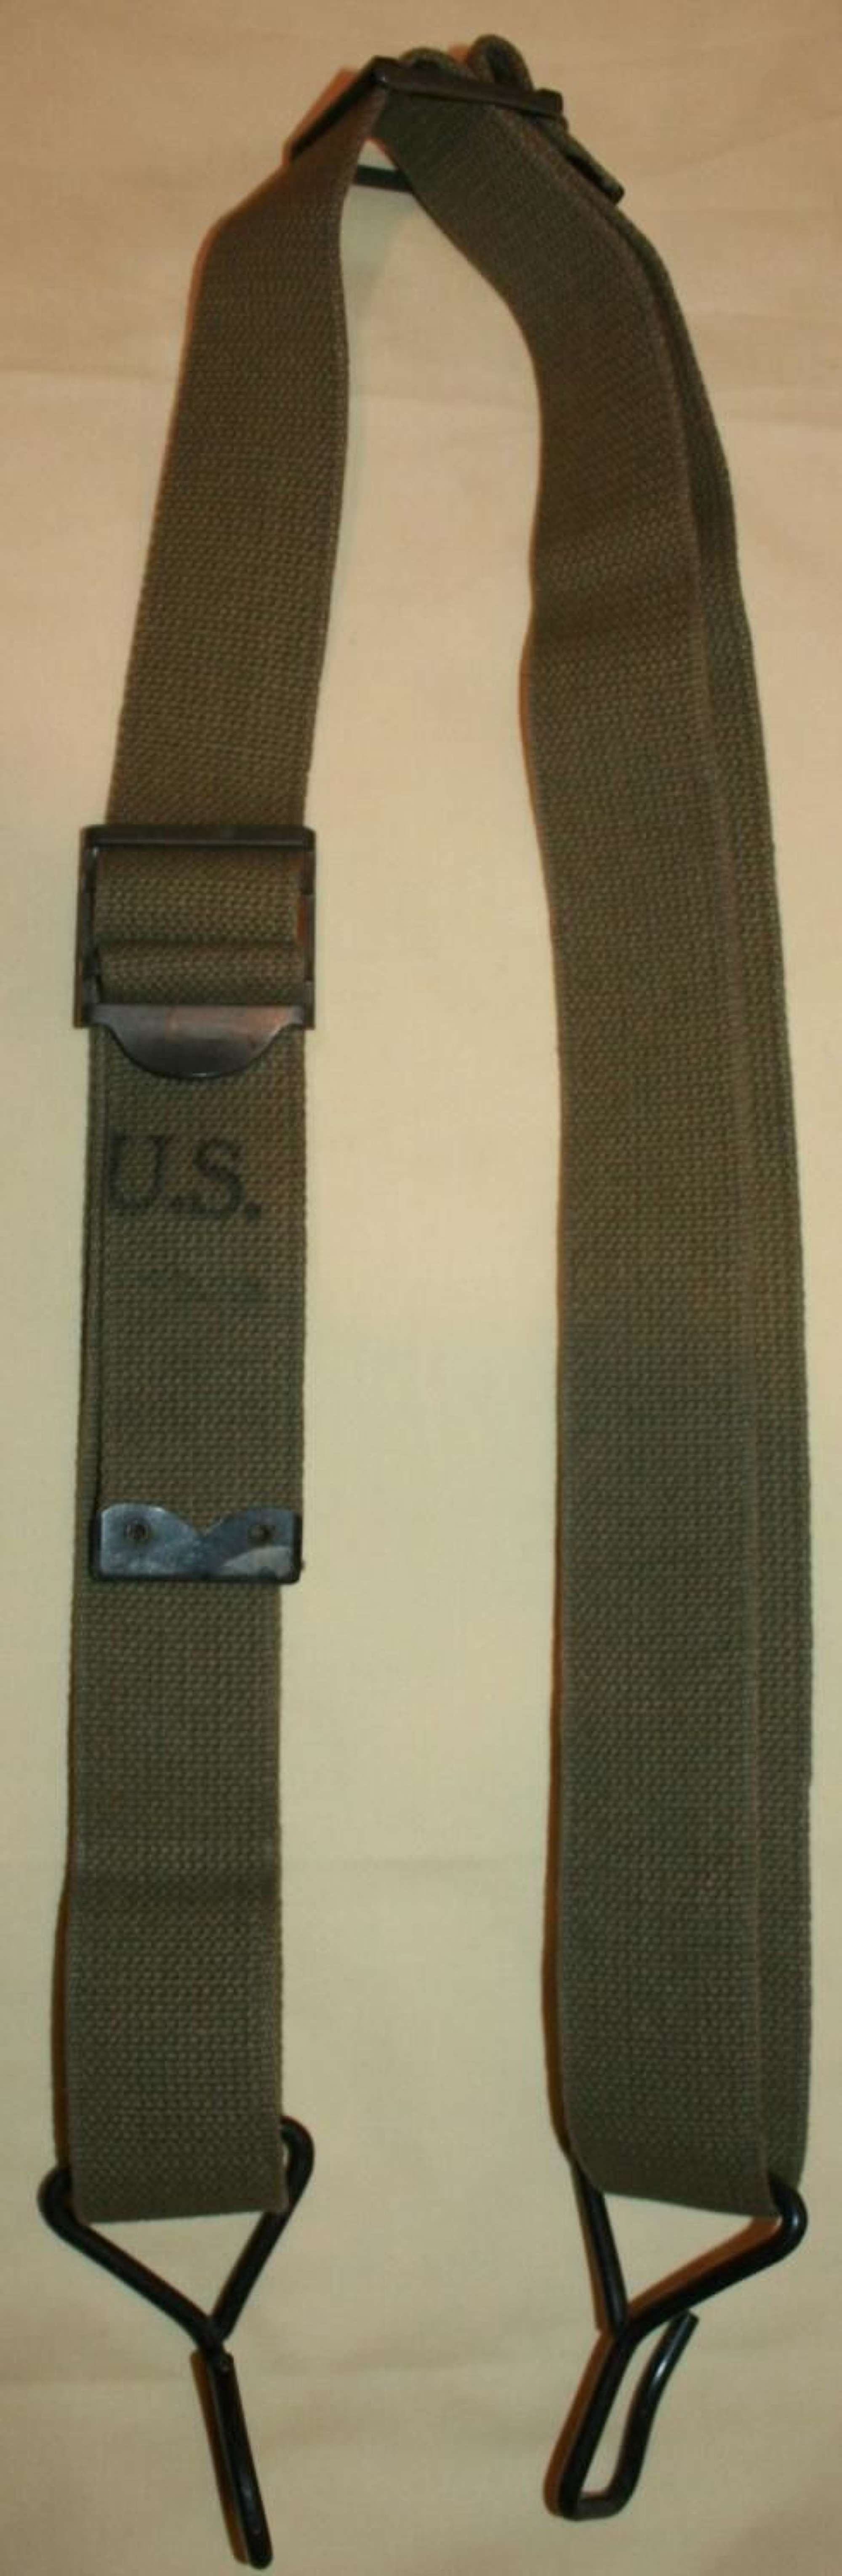 A HEAVY DUTY CARRIER / SECURING STRAP